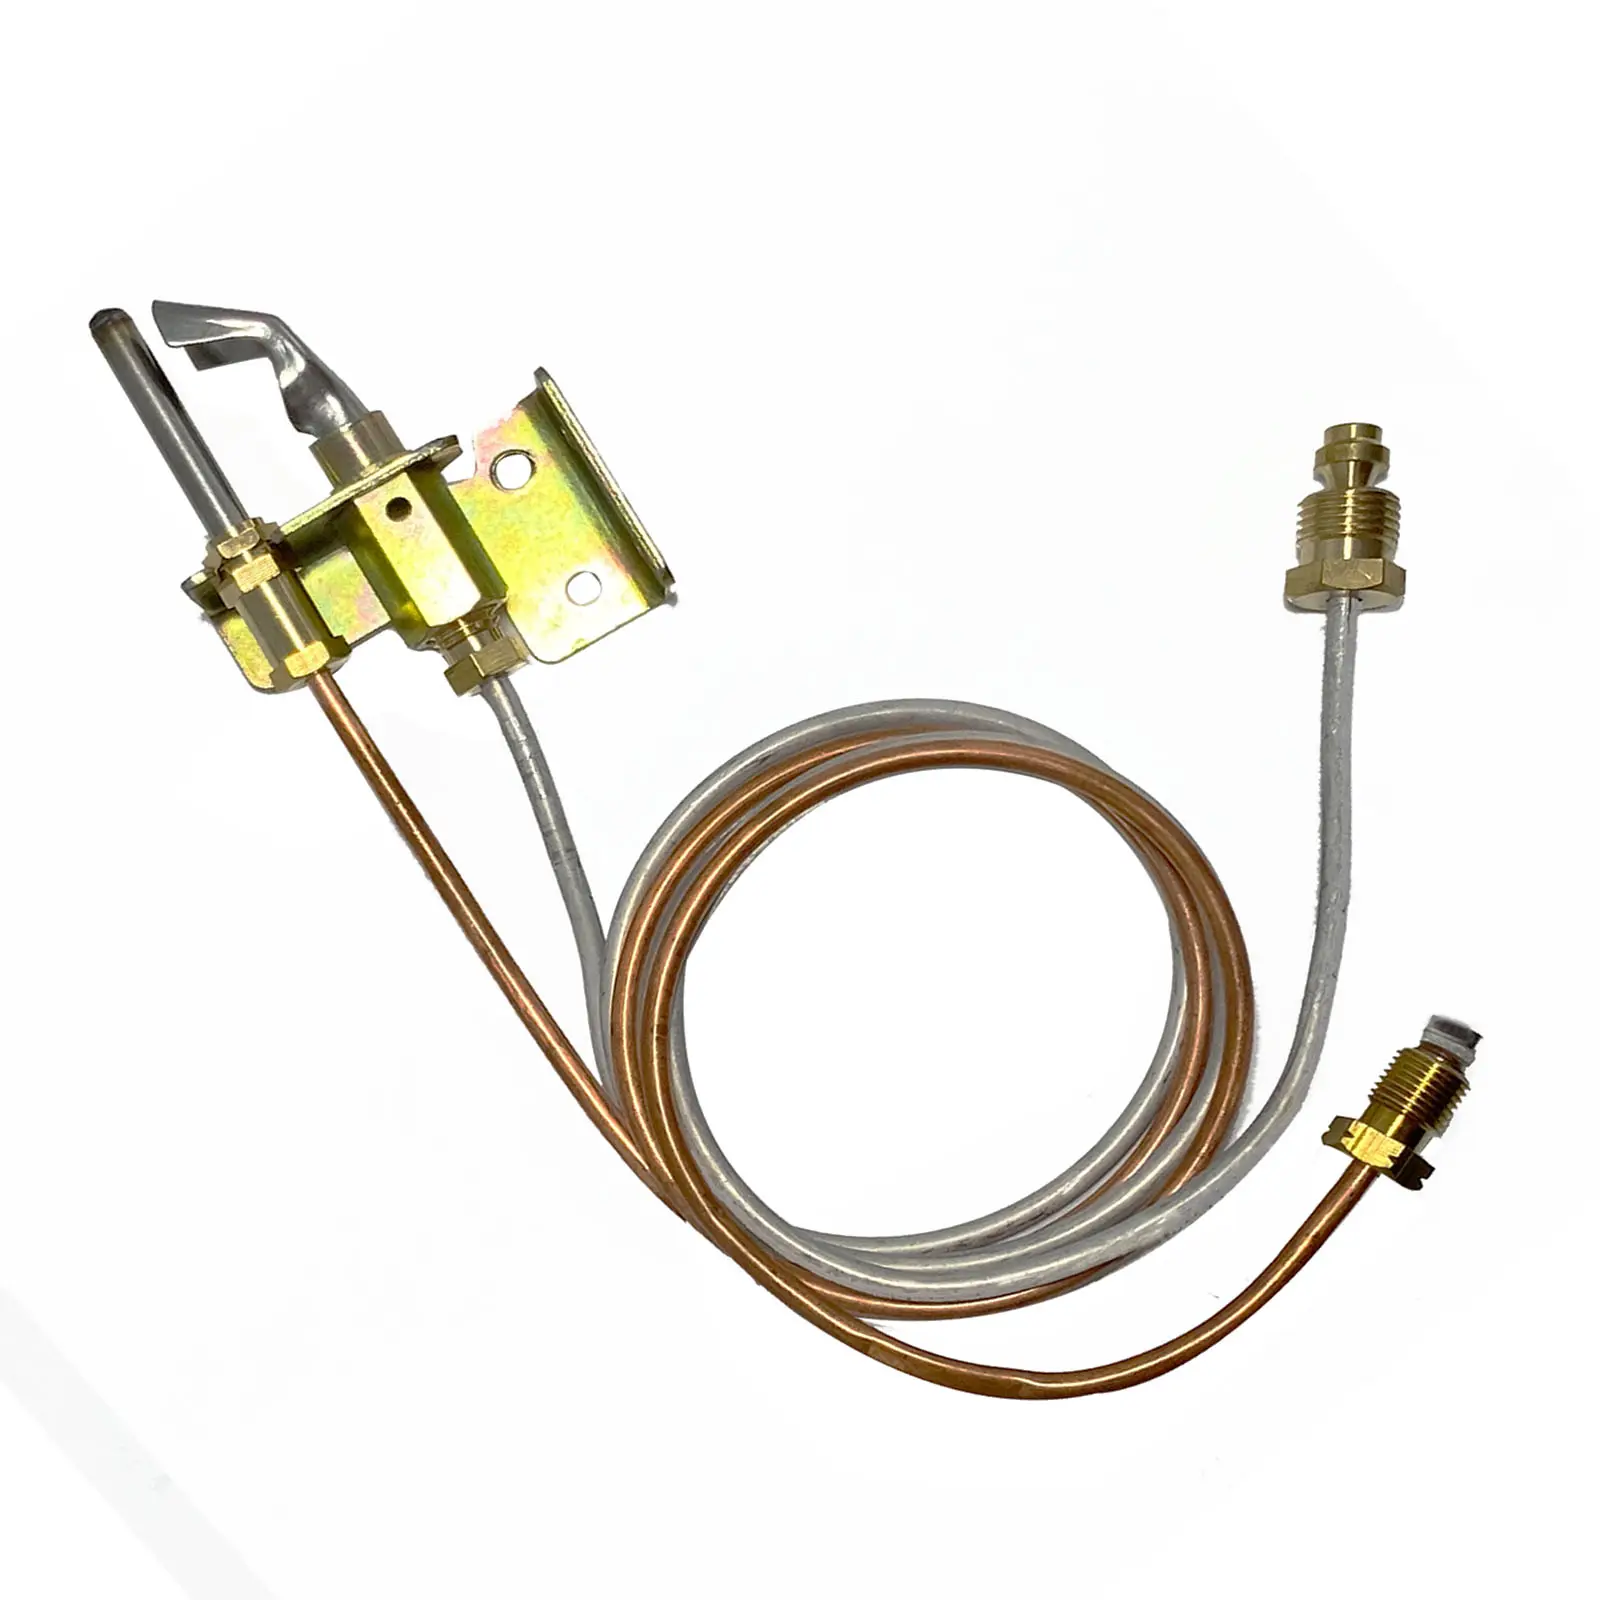 Water Heater Pilot Assembly Includes Pilot Light Thermocouple and Tubing LP Propane and Natural